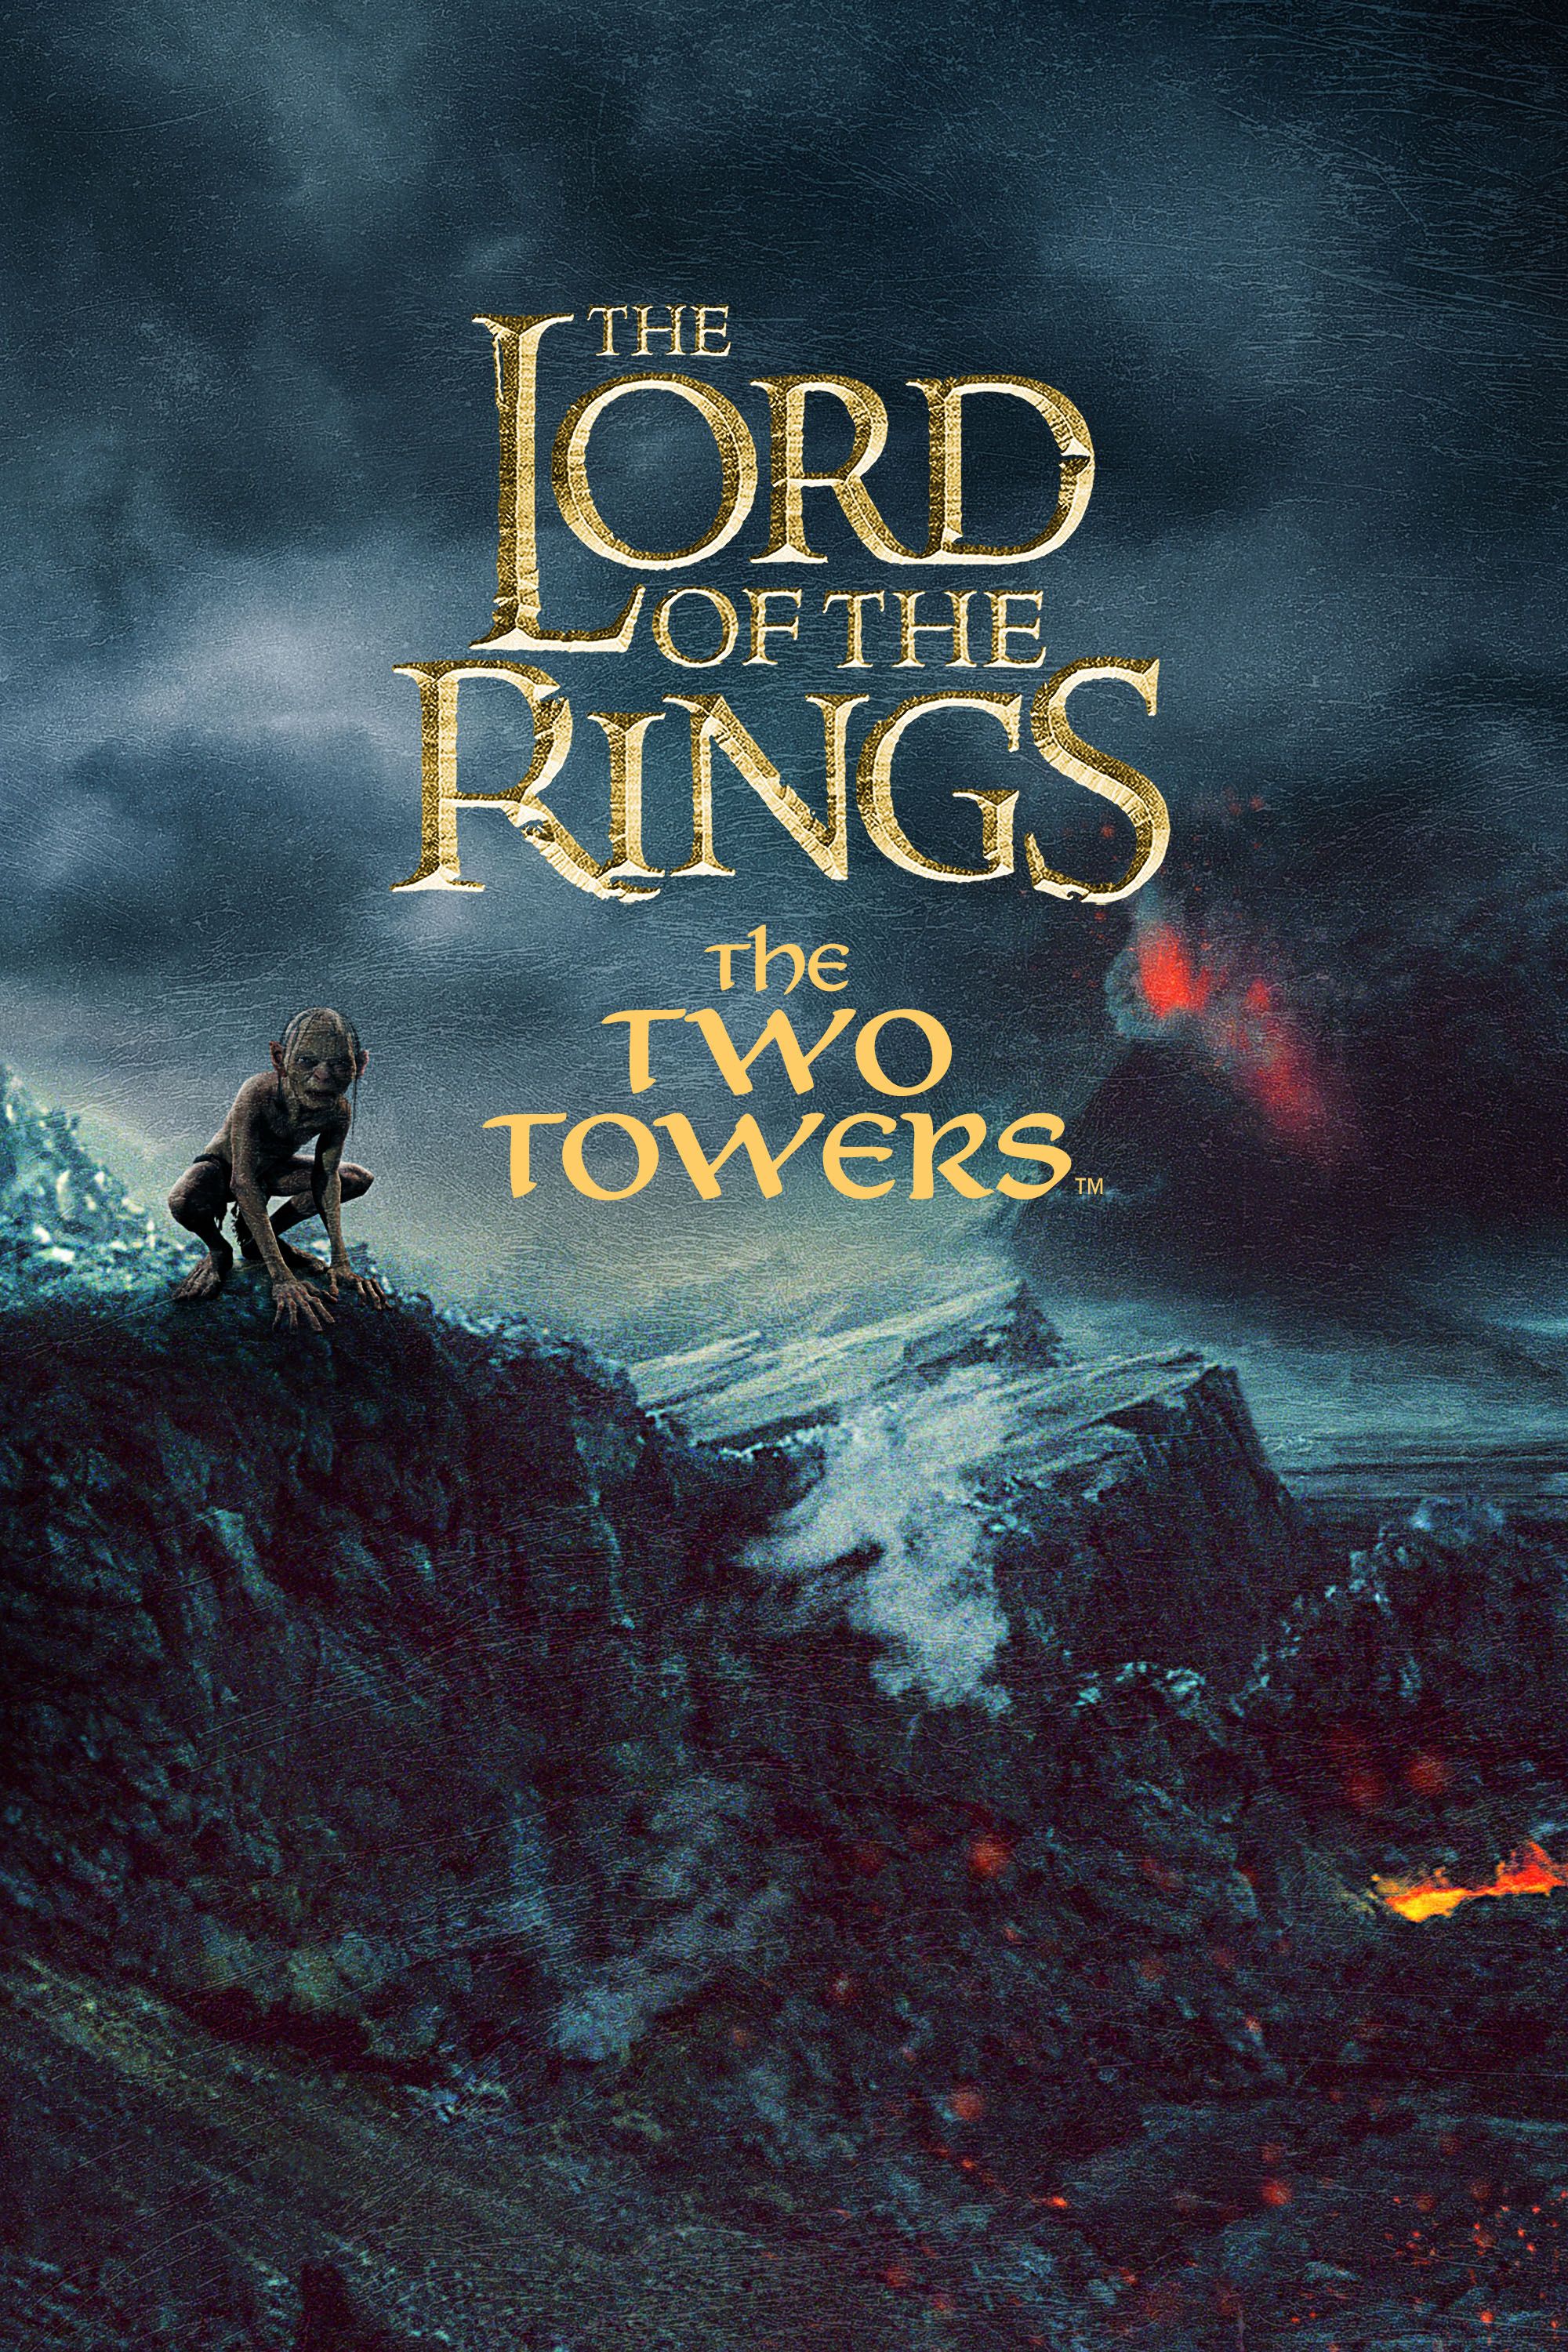 breken blaas gat Armoedig The Lord of the Rings: The Two Towers | Full Movie | Movies Anywhere